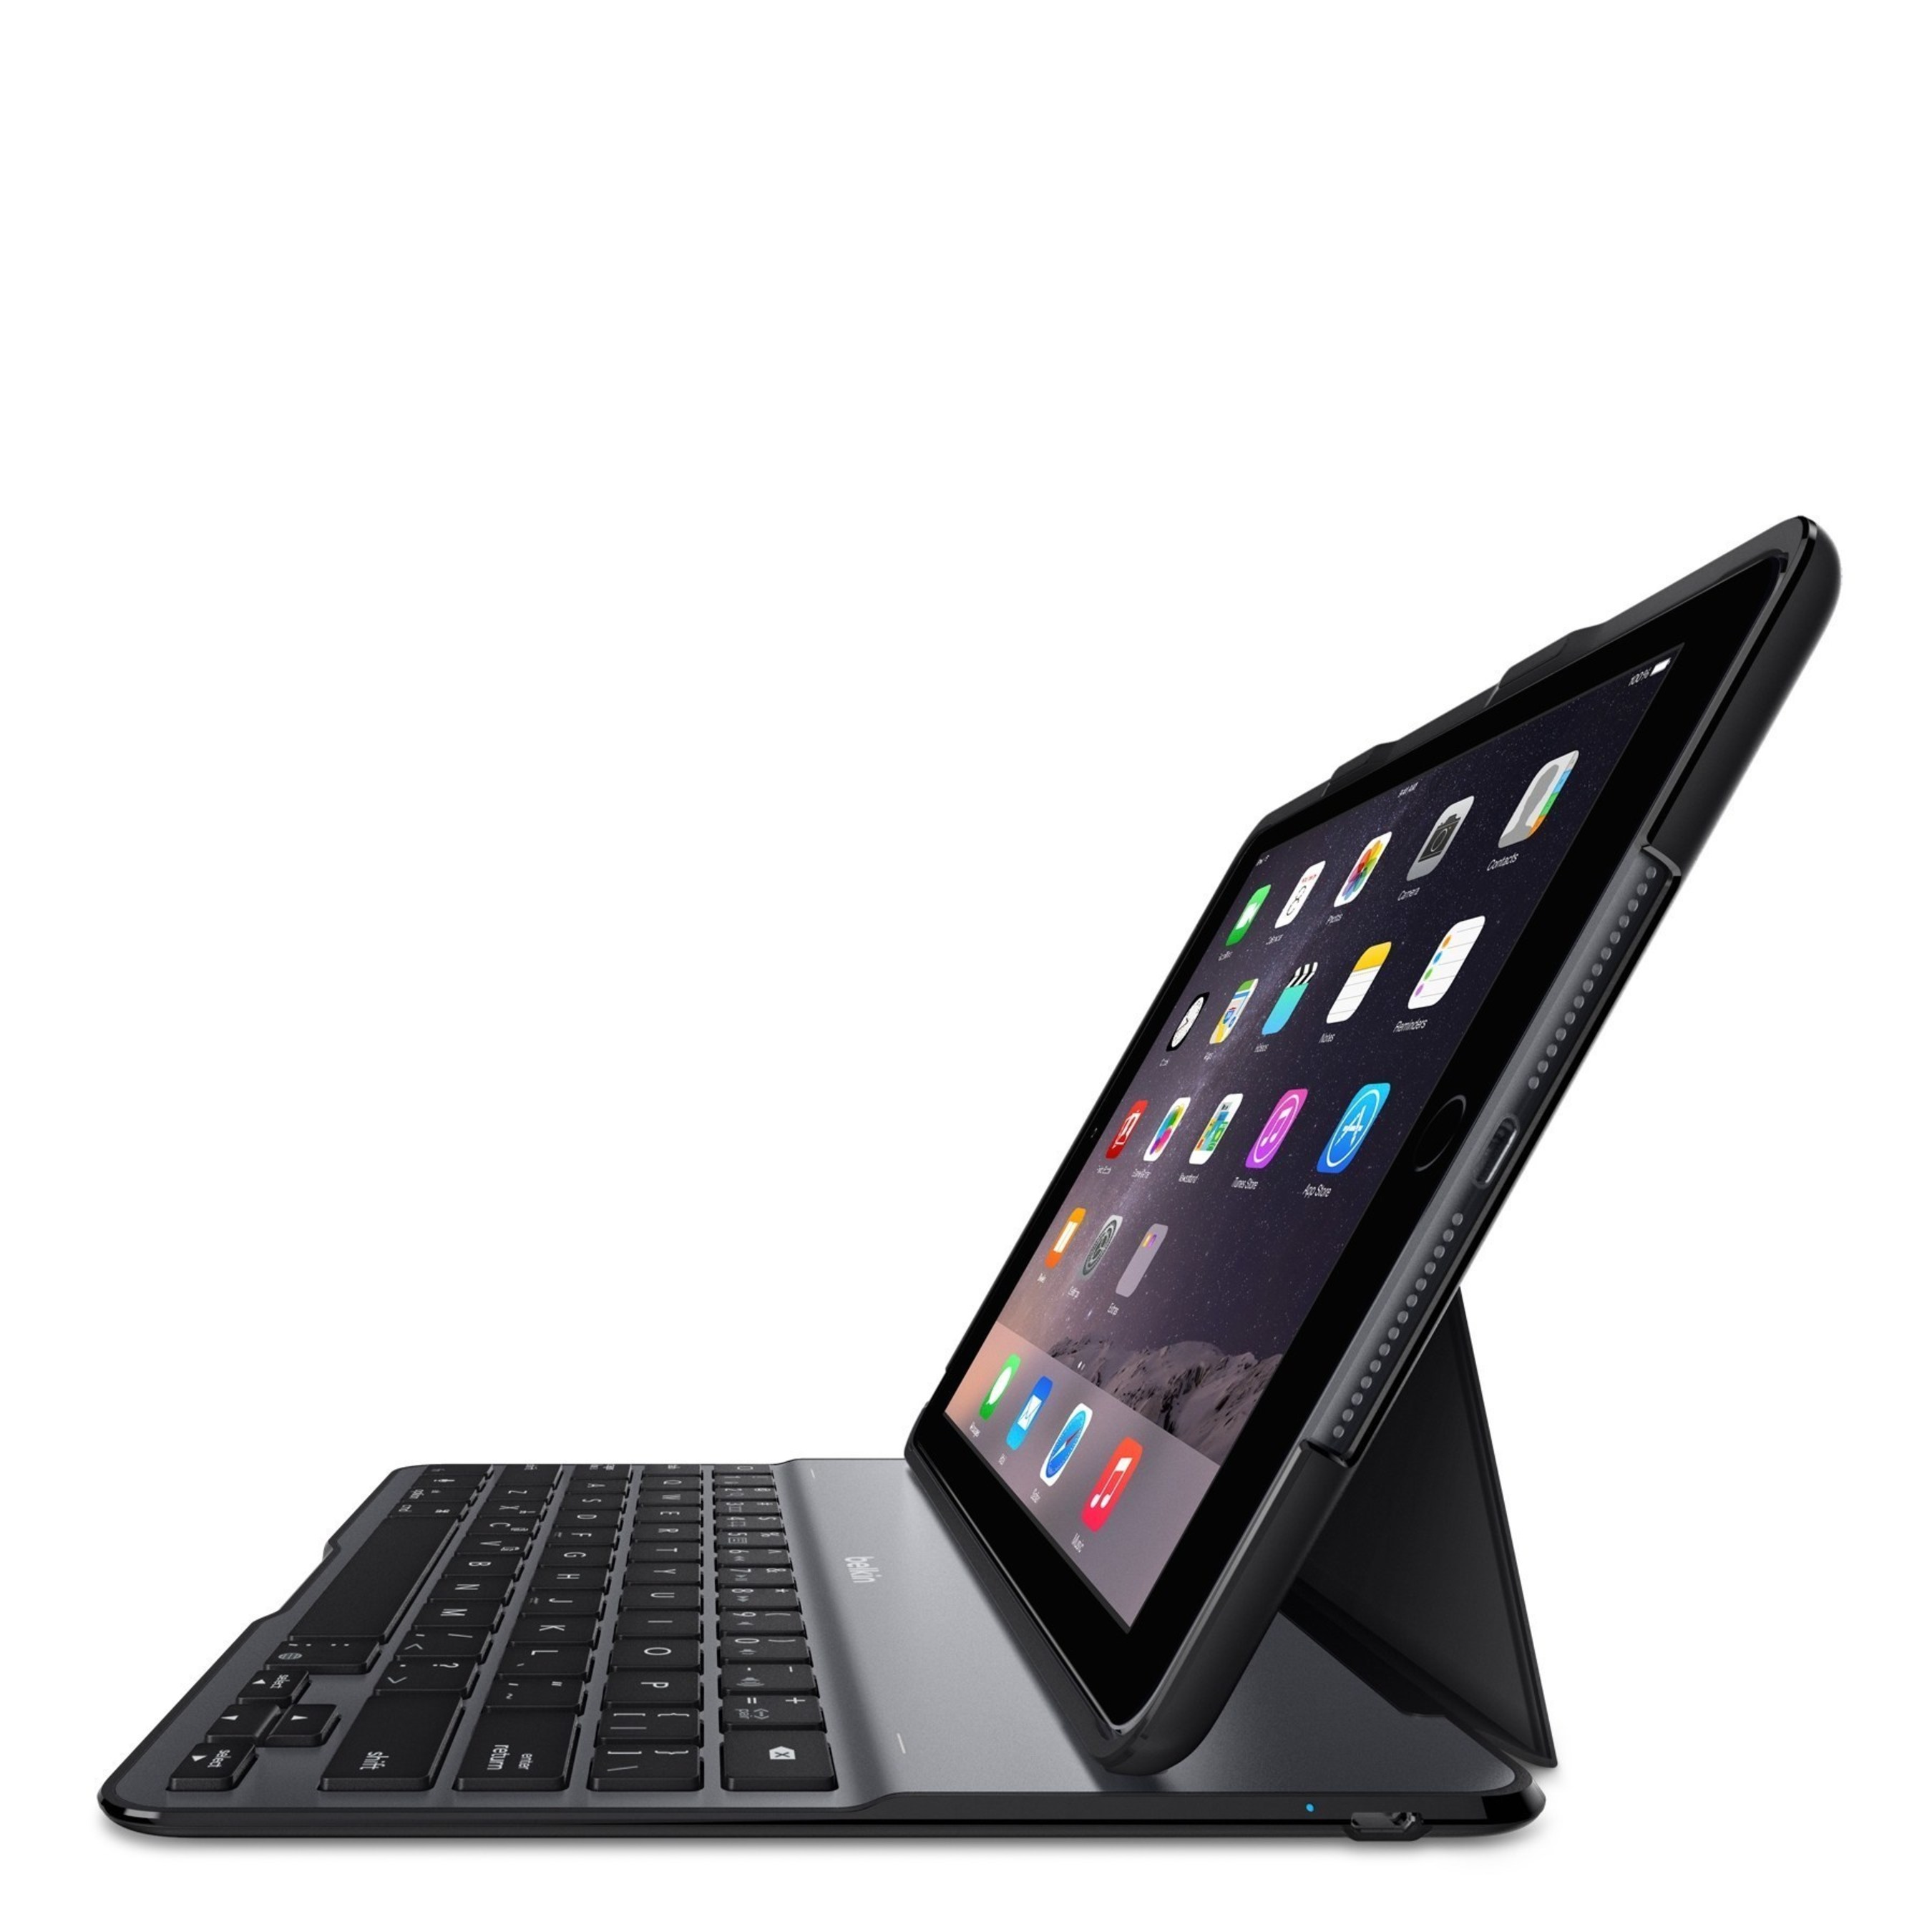 Weighing a mere 370g, the QODE Ultimate Lite Keyboard case is the lightest keyboard in Belkin's collection of premium tablet keyboards.